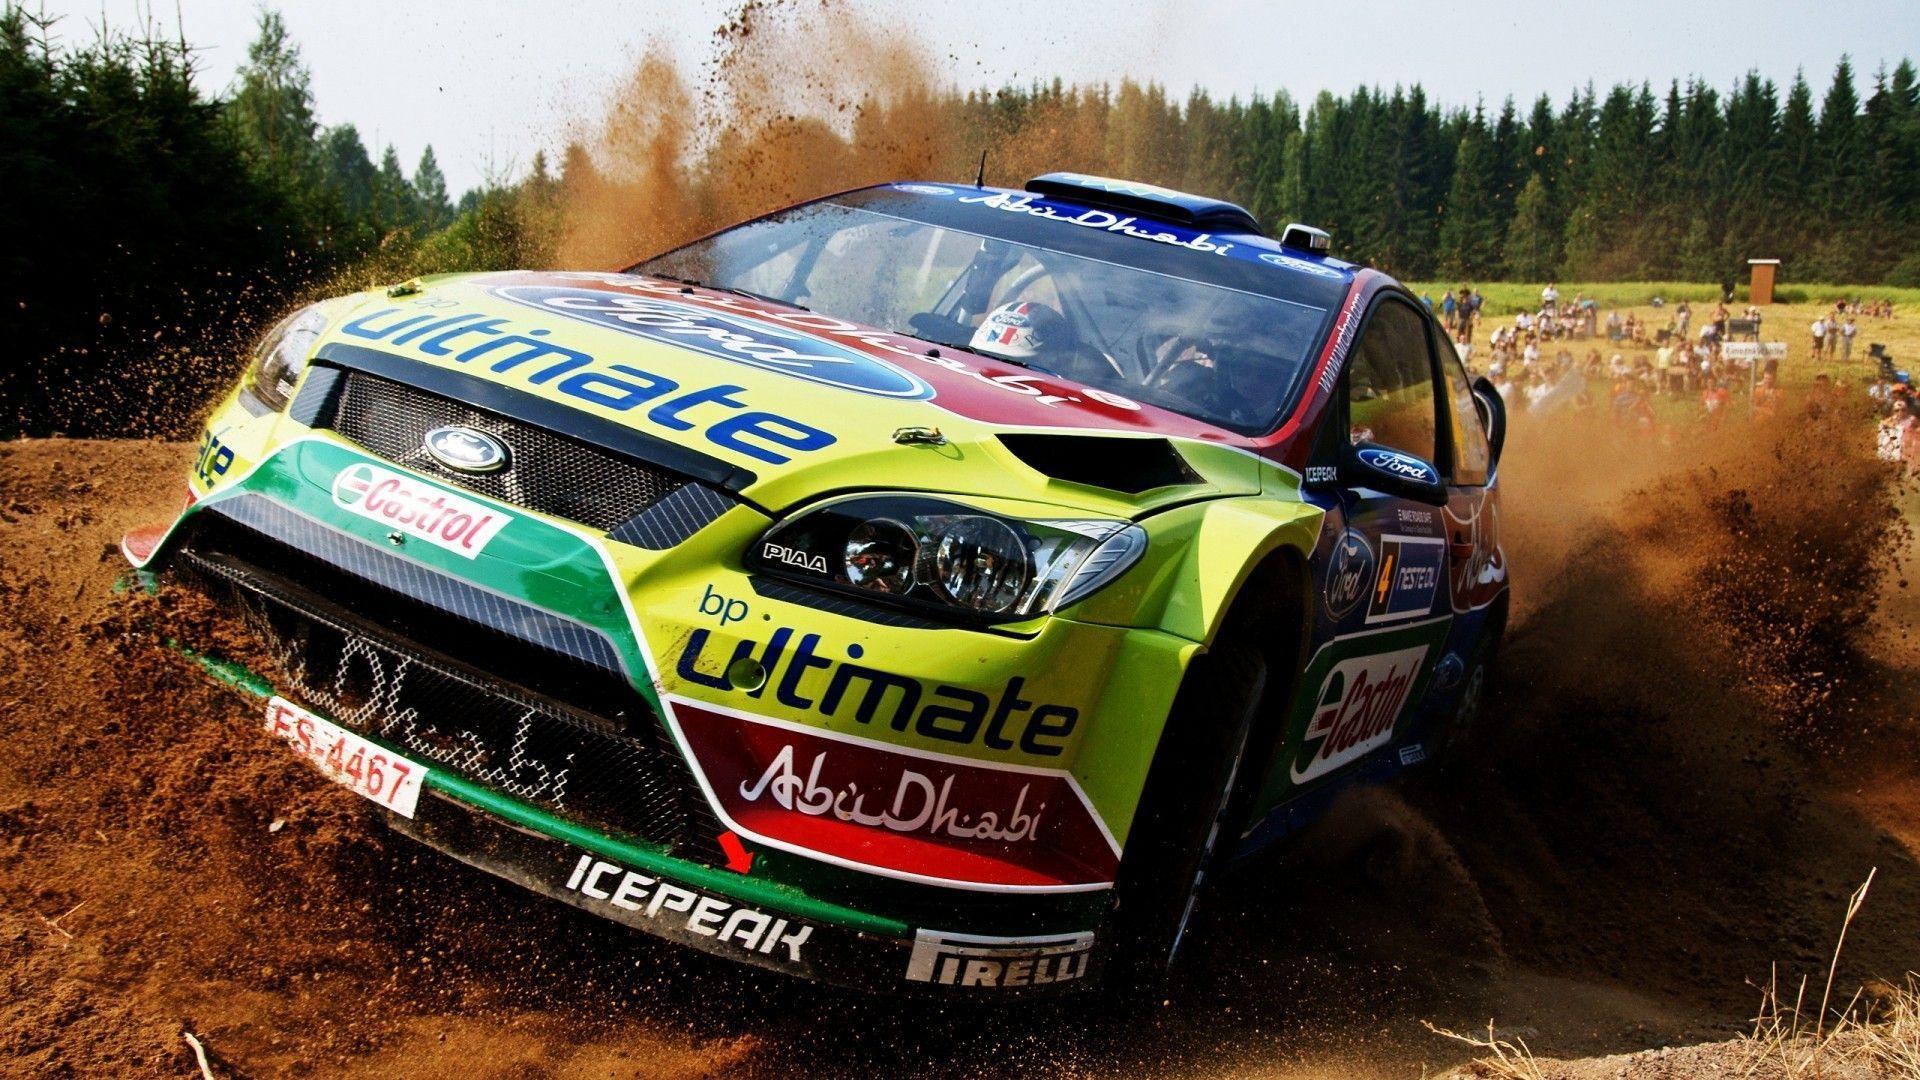 Racing Wrc Petter Solberg Races Rally Cars Offroad W Wallpaper